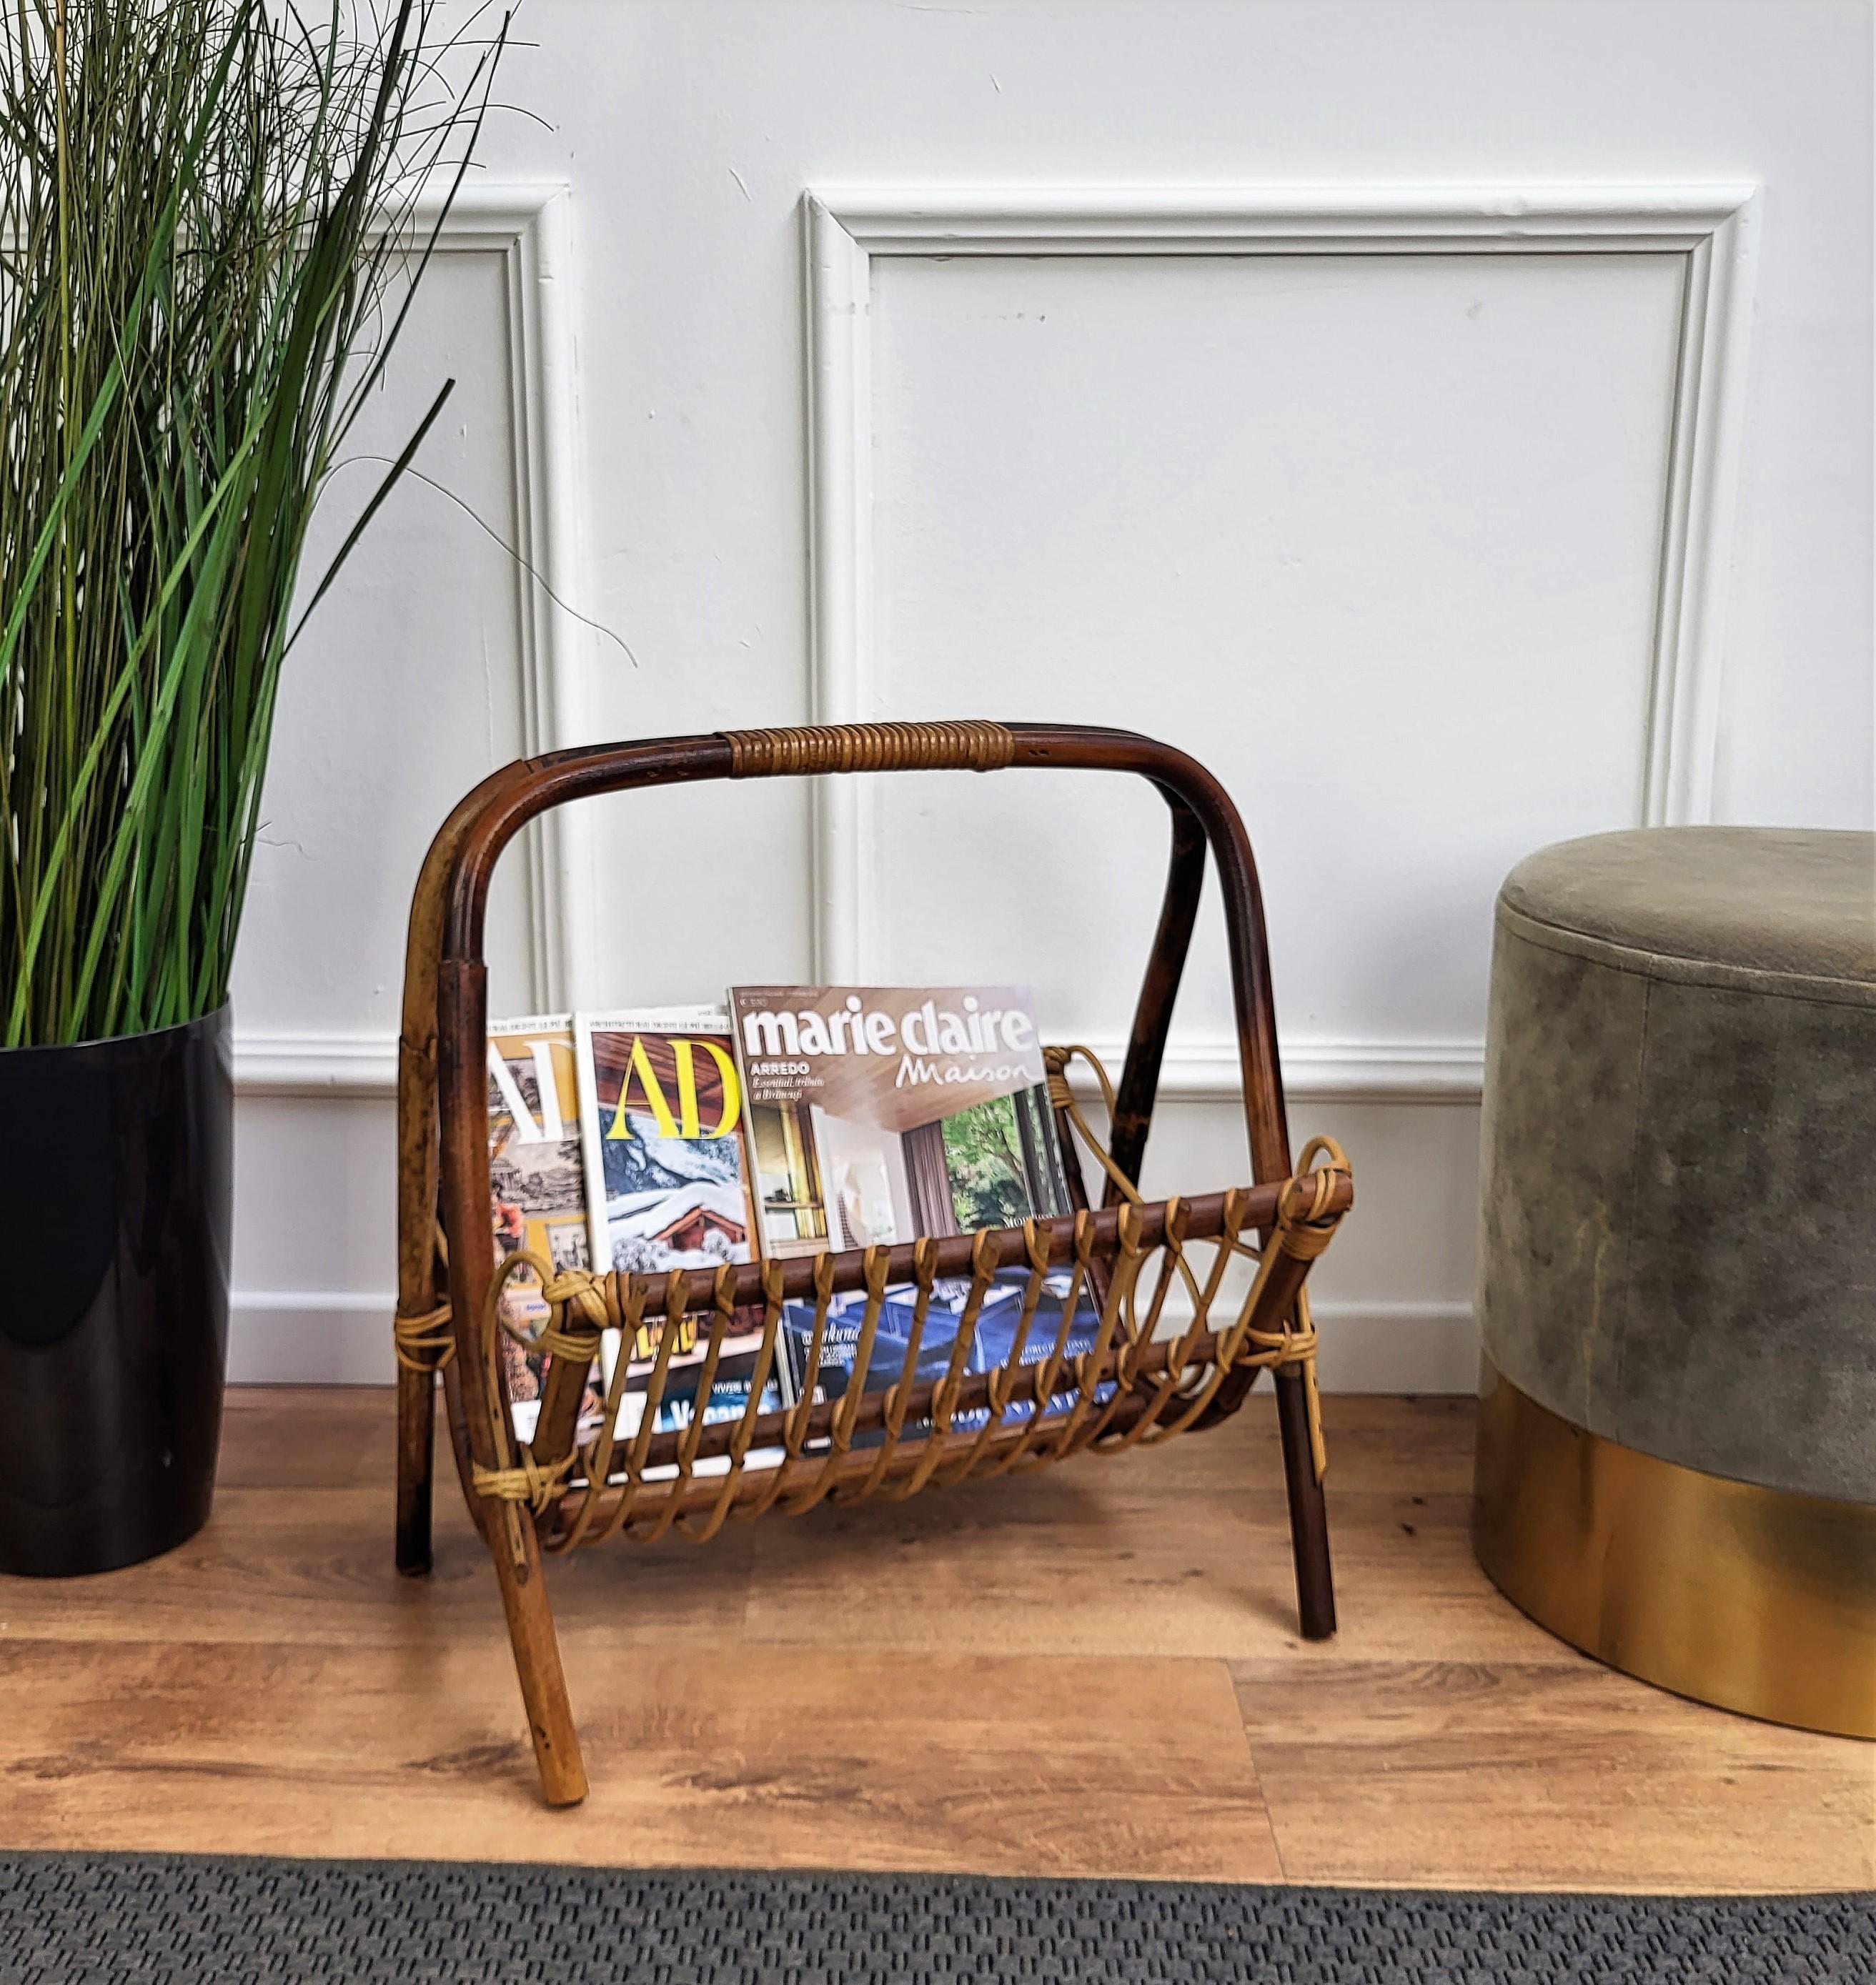 Beautiful 1960s Italian Mid-Century Modern magazine rack stand in bamboo. The organic beauty of the woven materials is timeless and Classic, making bamboo and rattan furniture incredibly versatile. It’s equally at home on an airy casual porch or in